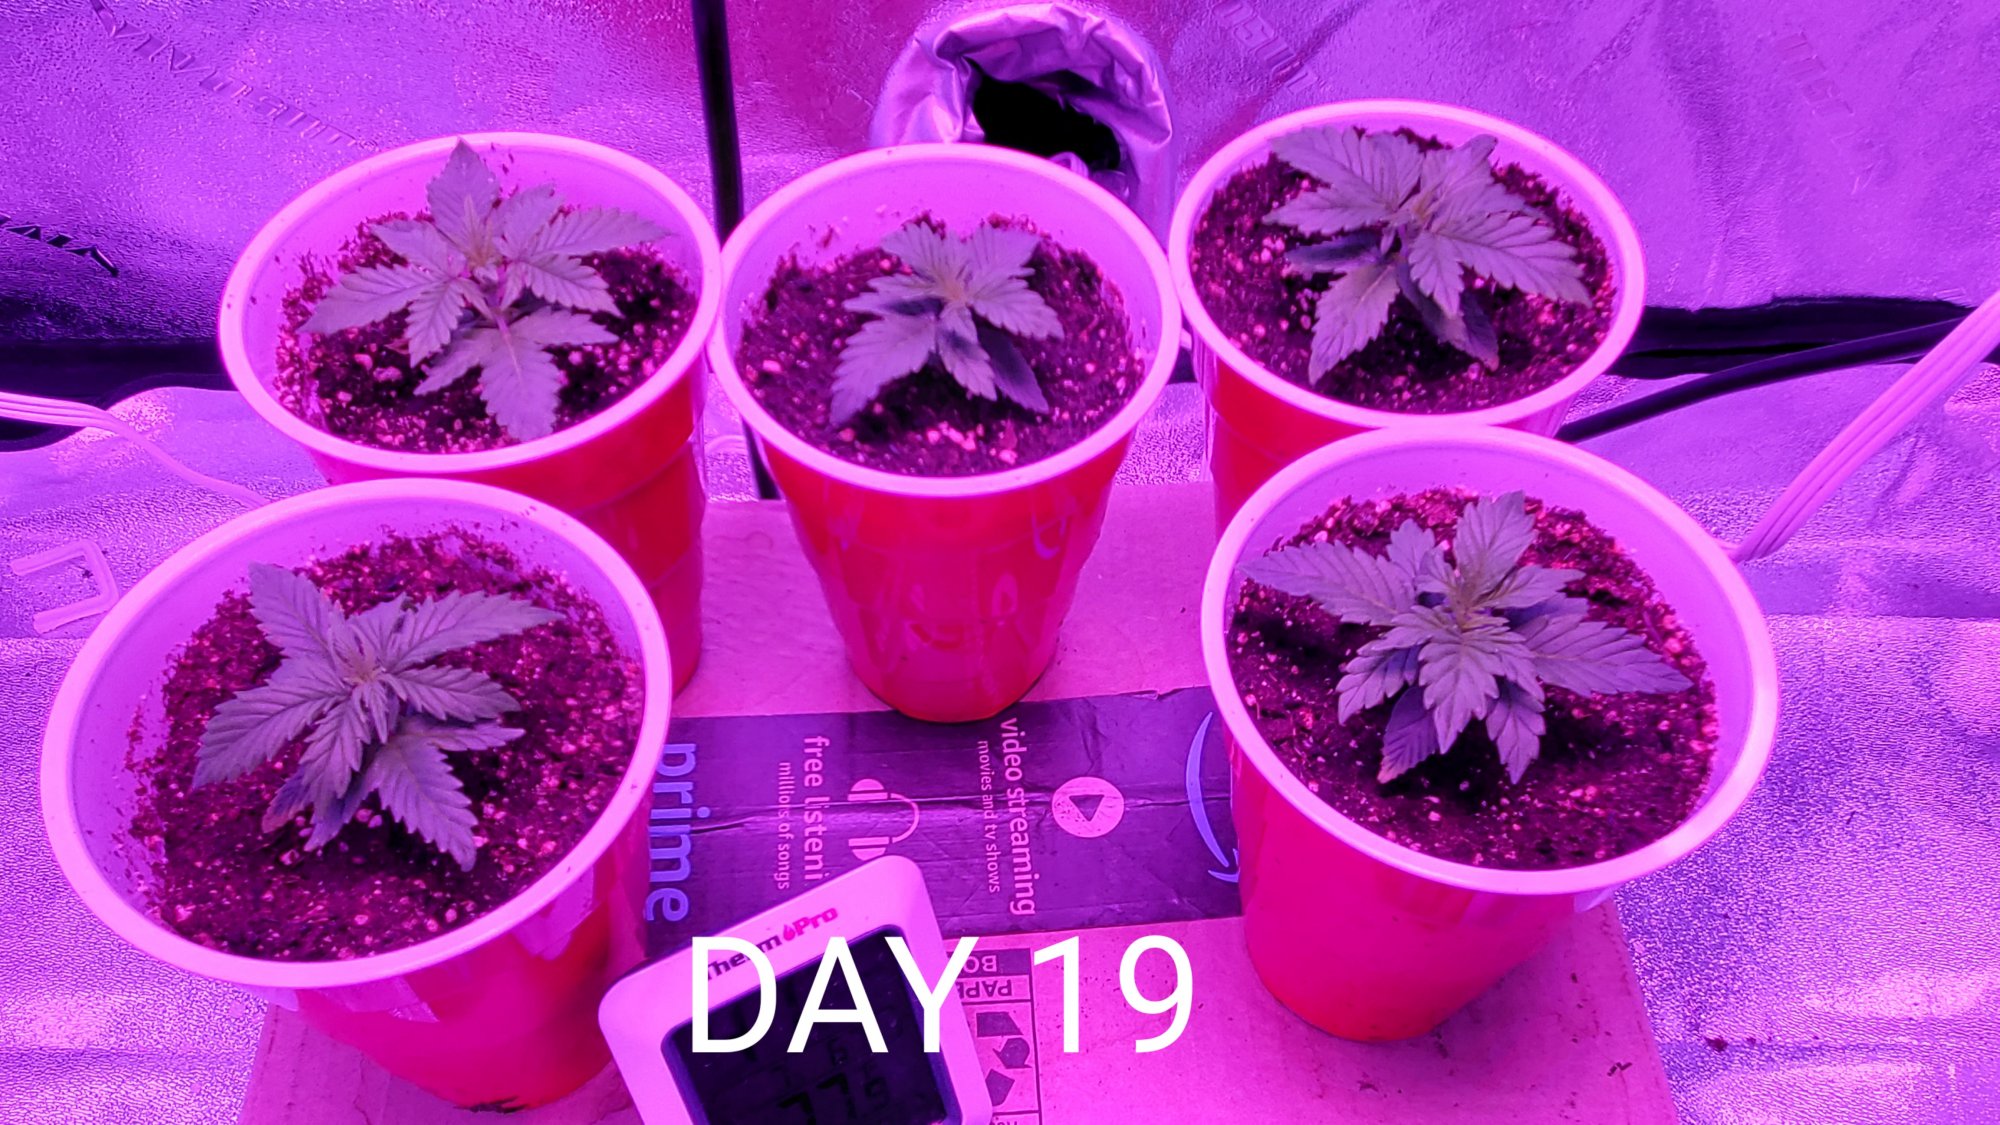 Seeds 26 days ago and this is where i am so far 3